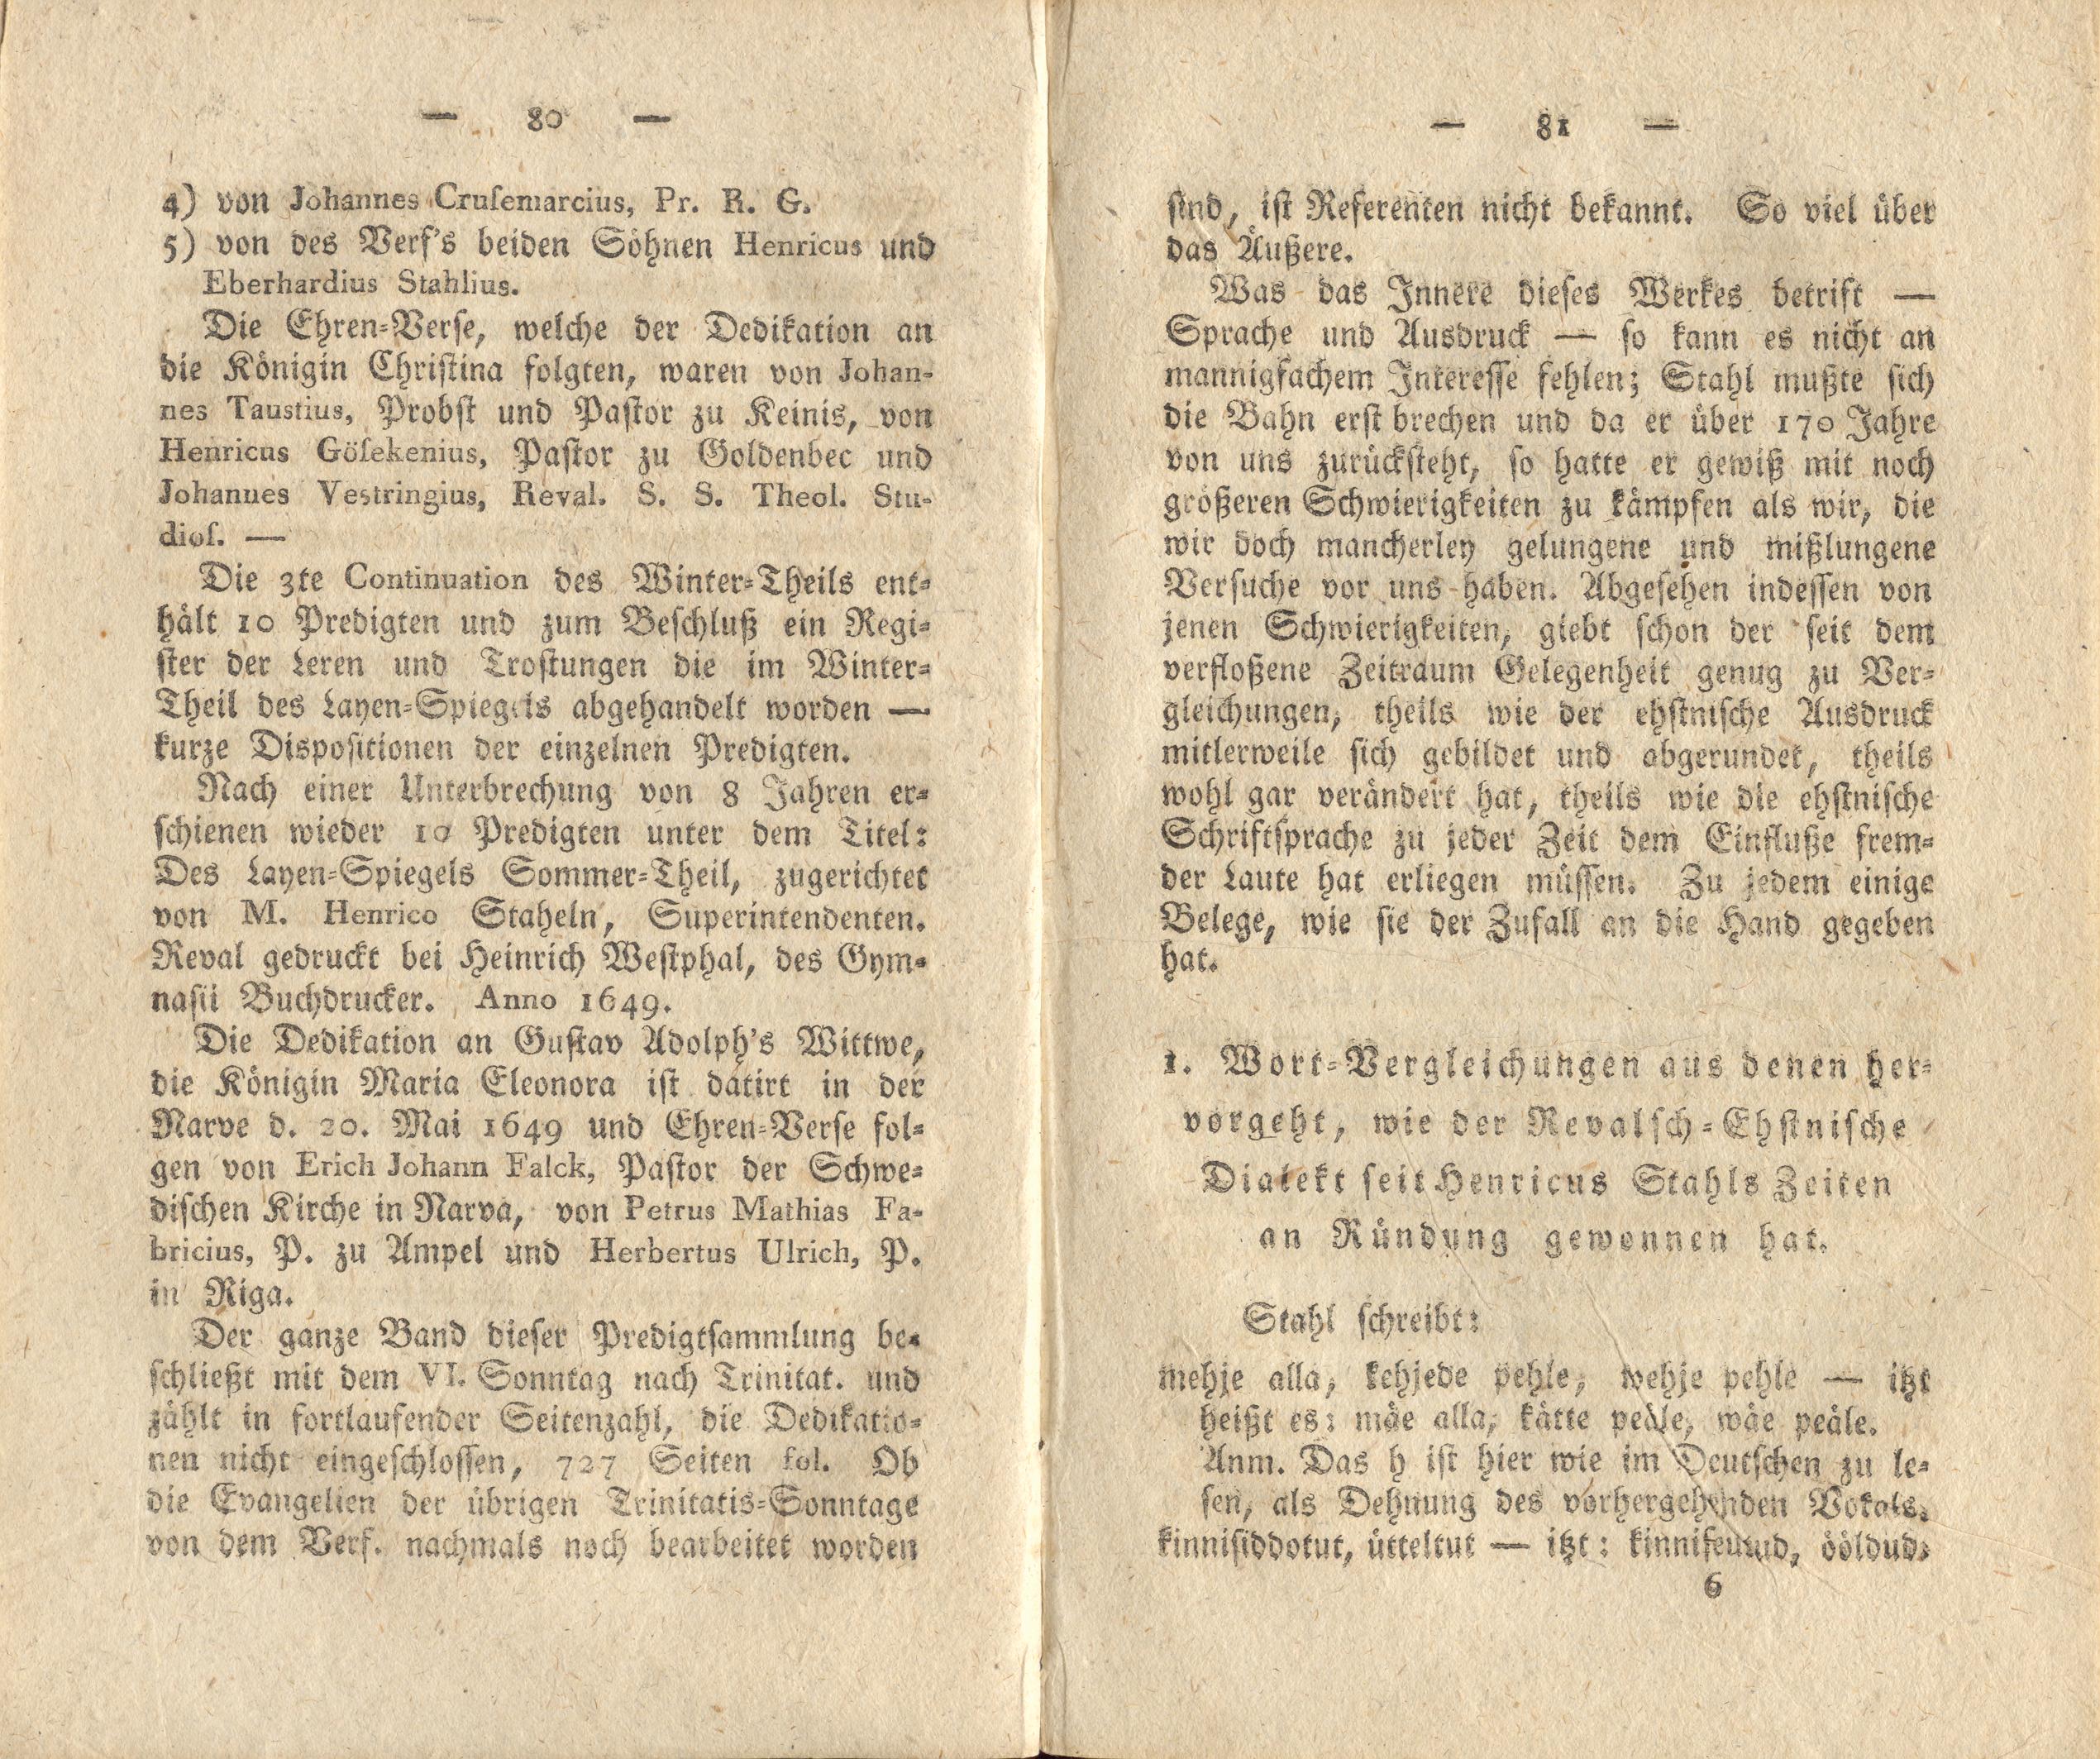 Beiträge [12] (1818) | 41. (80-81) Main body of text